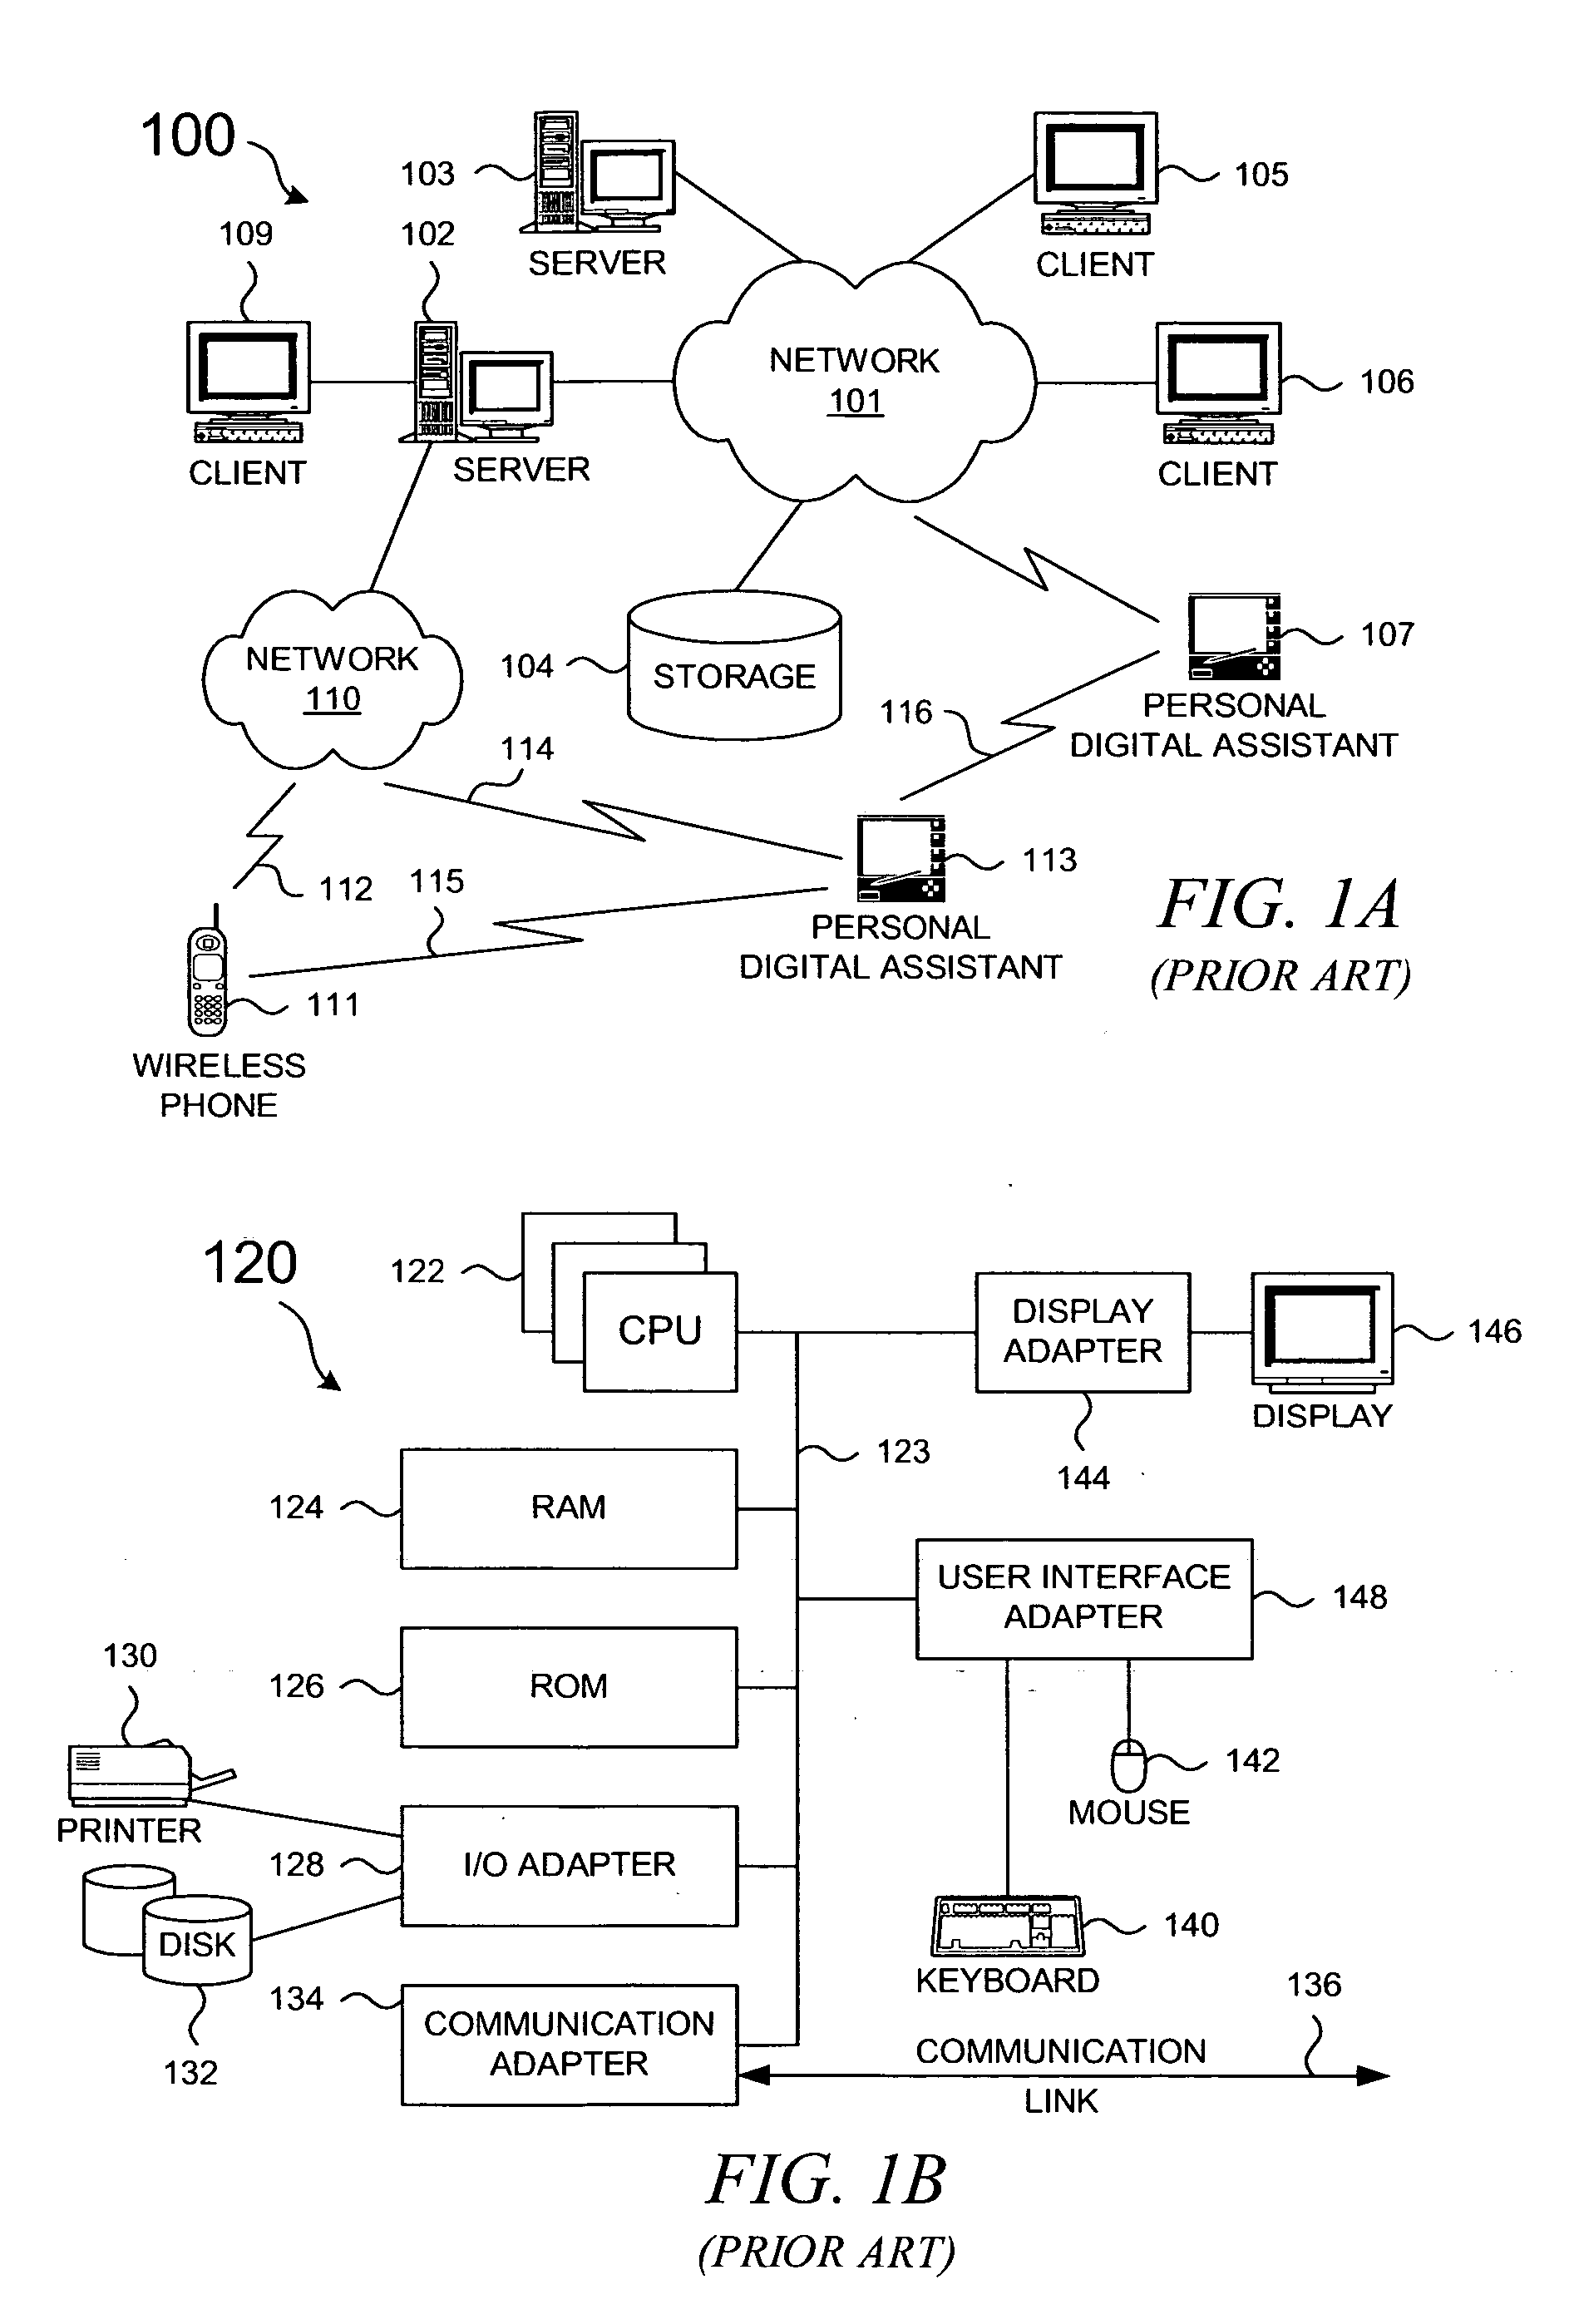 Method and system for dynamic adjustment of computer security based on network activity of users